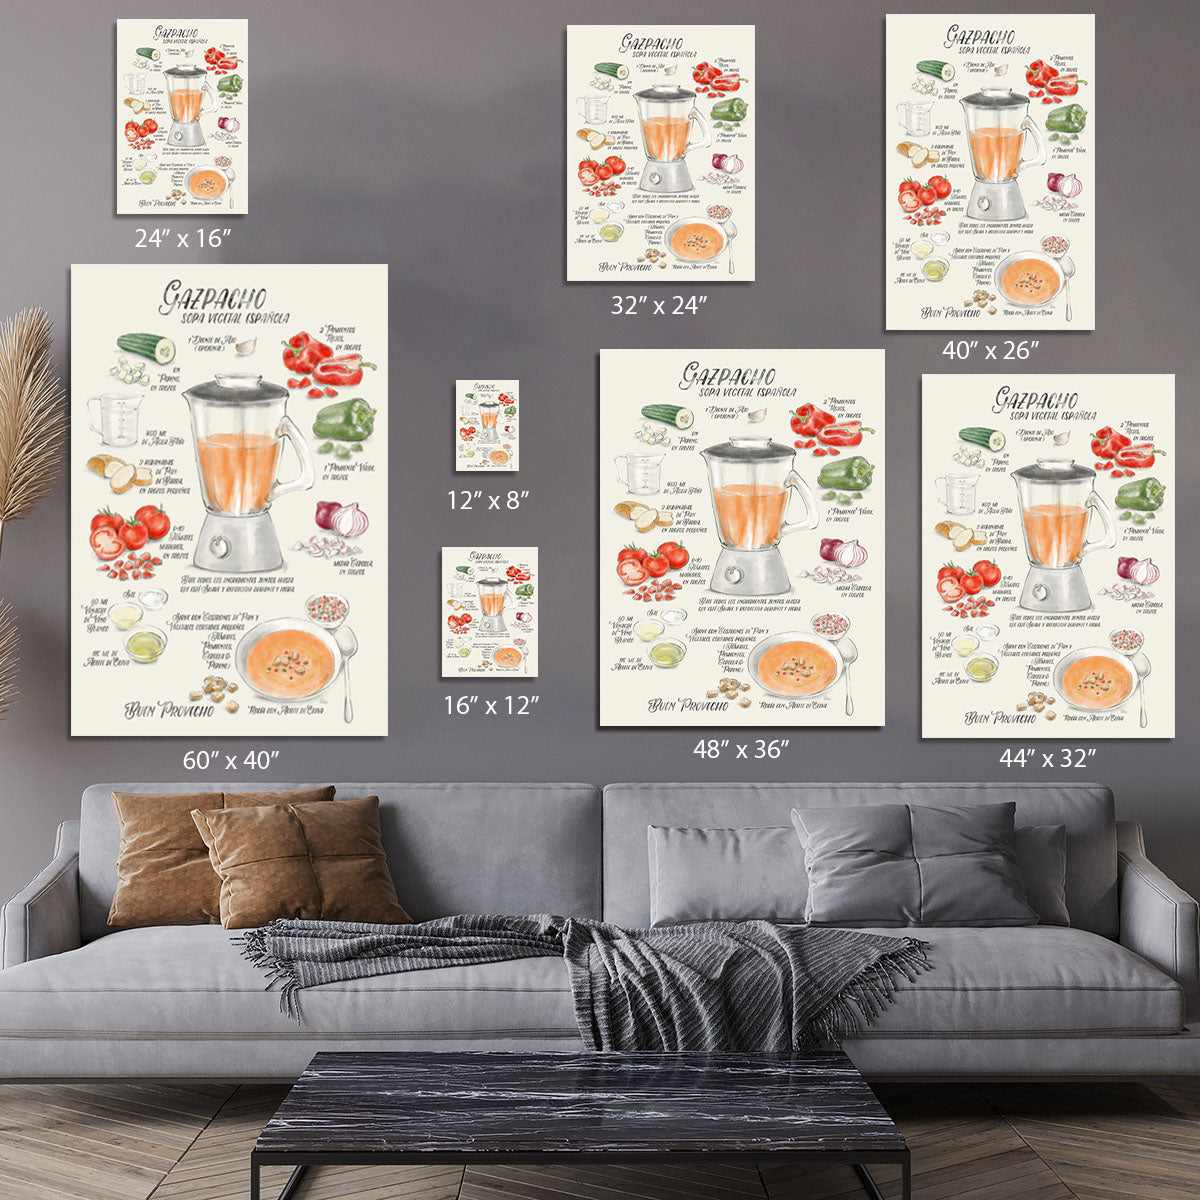 Gazpacho illustrated recipe in Spanish Canvas Print or Poster - Canvas Art Rocks - 7